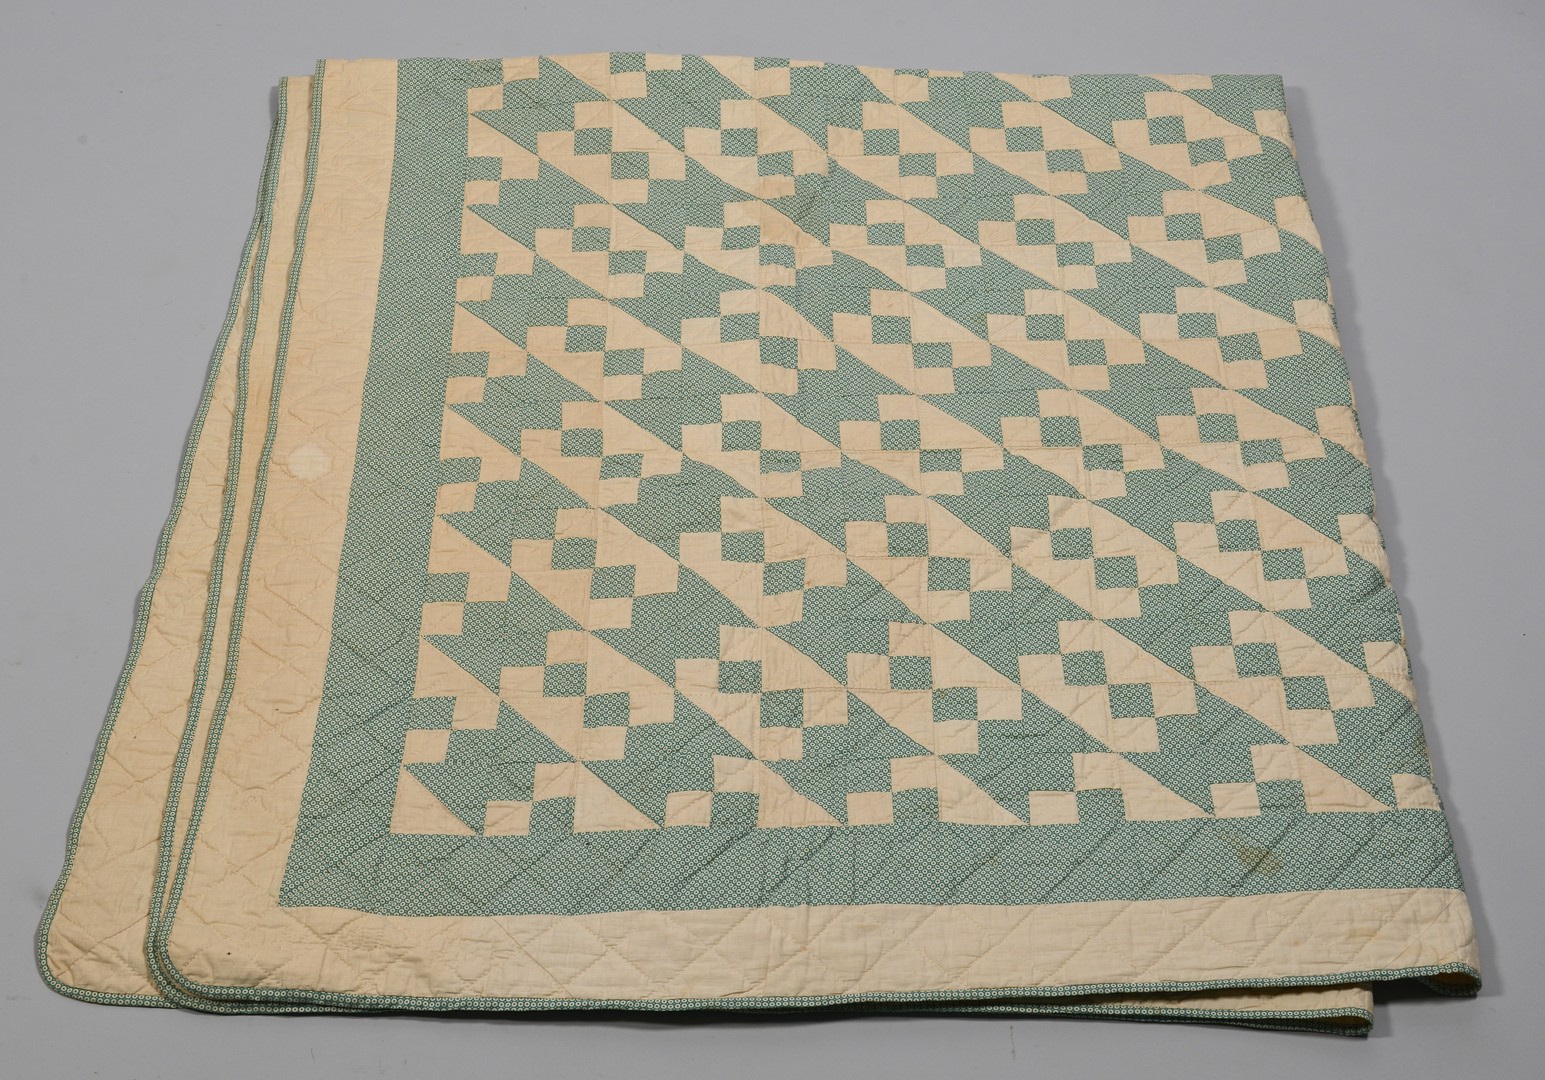 Lot 849: Group of 5 quilts, 1 signed